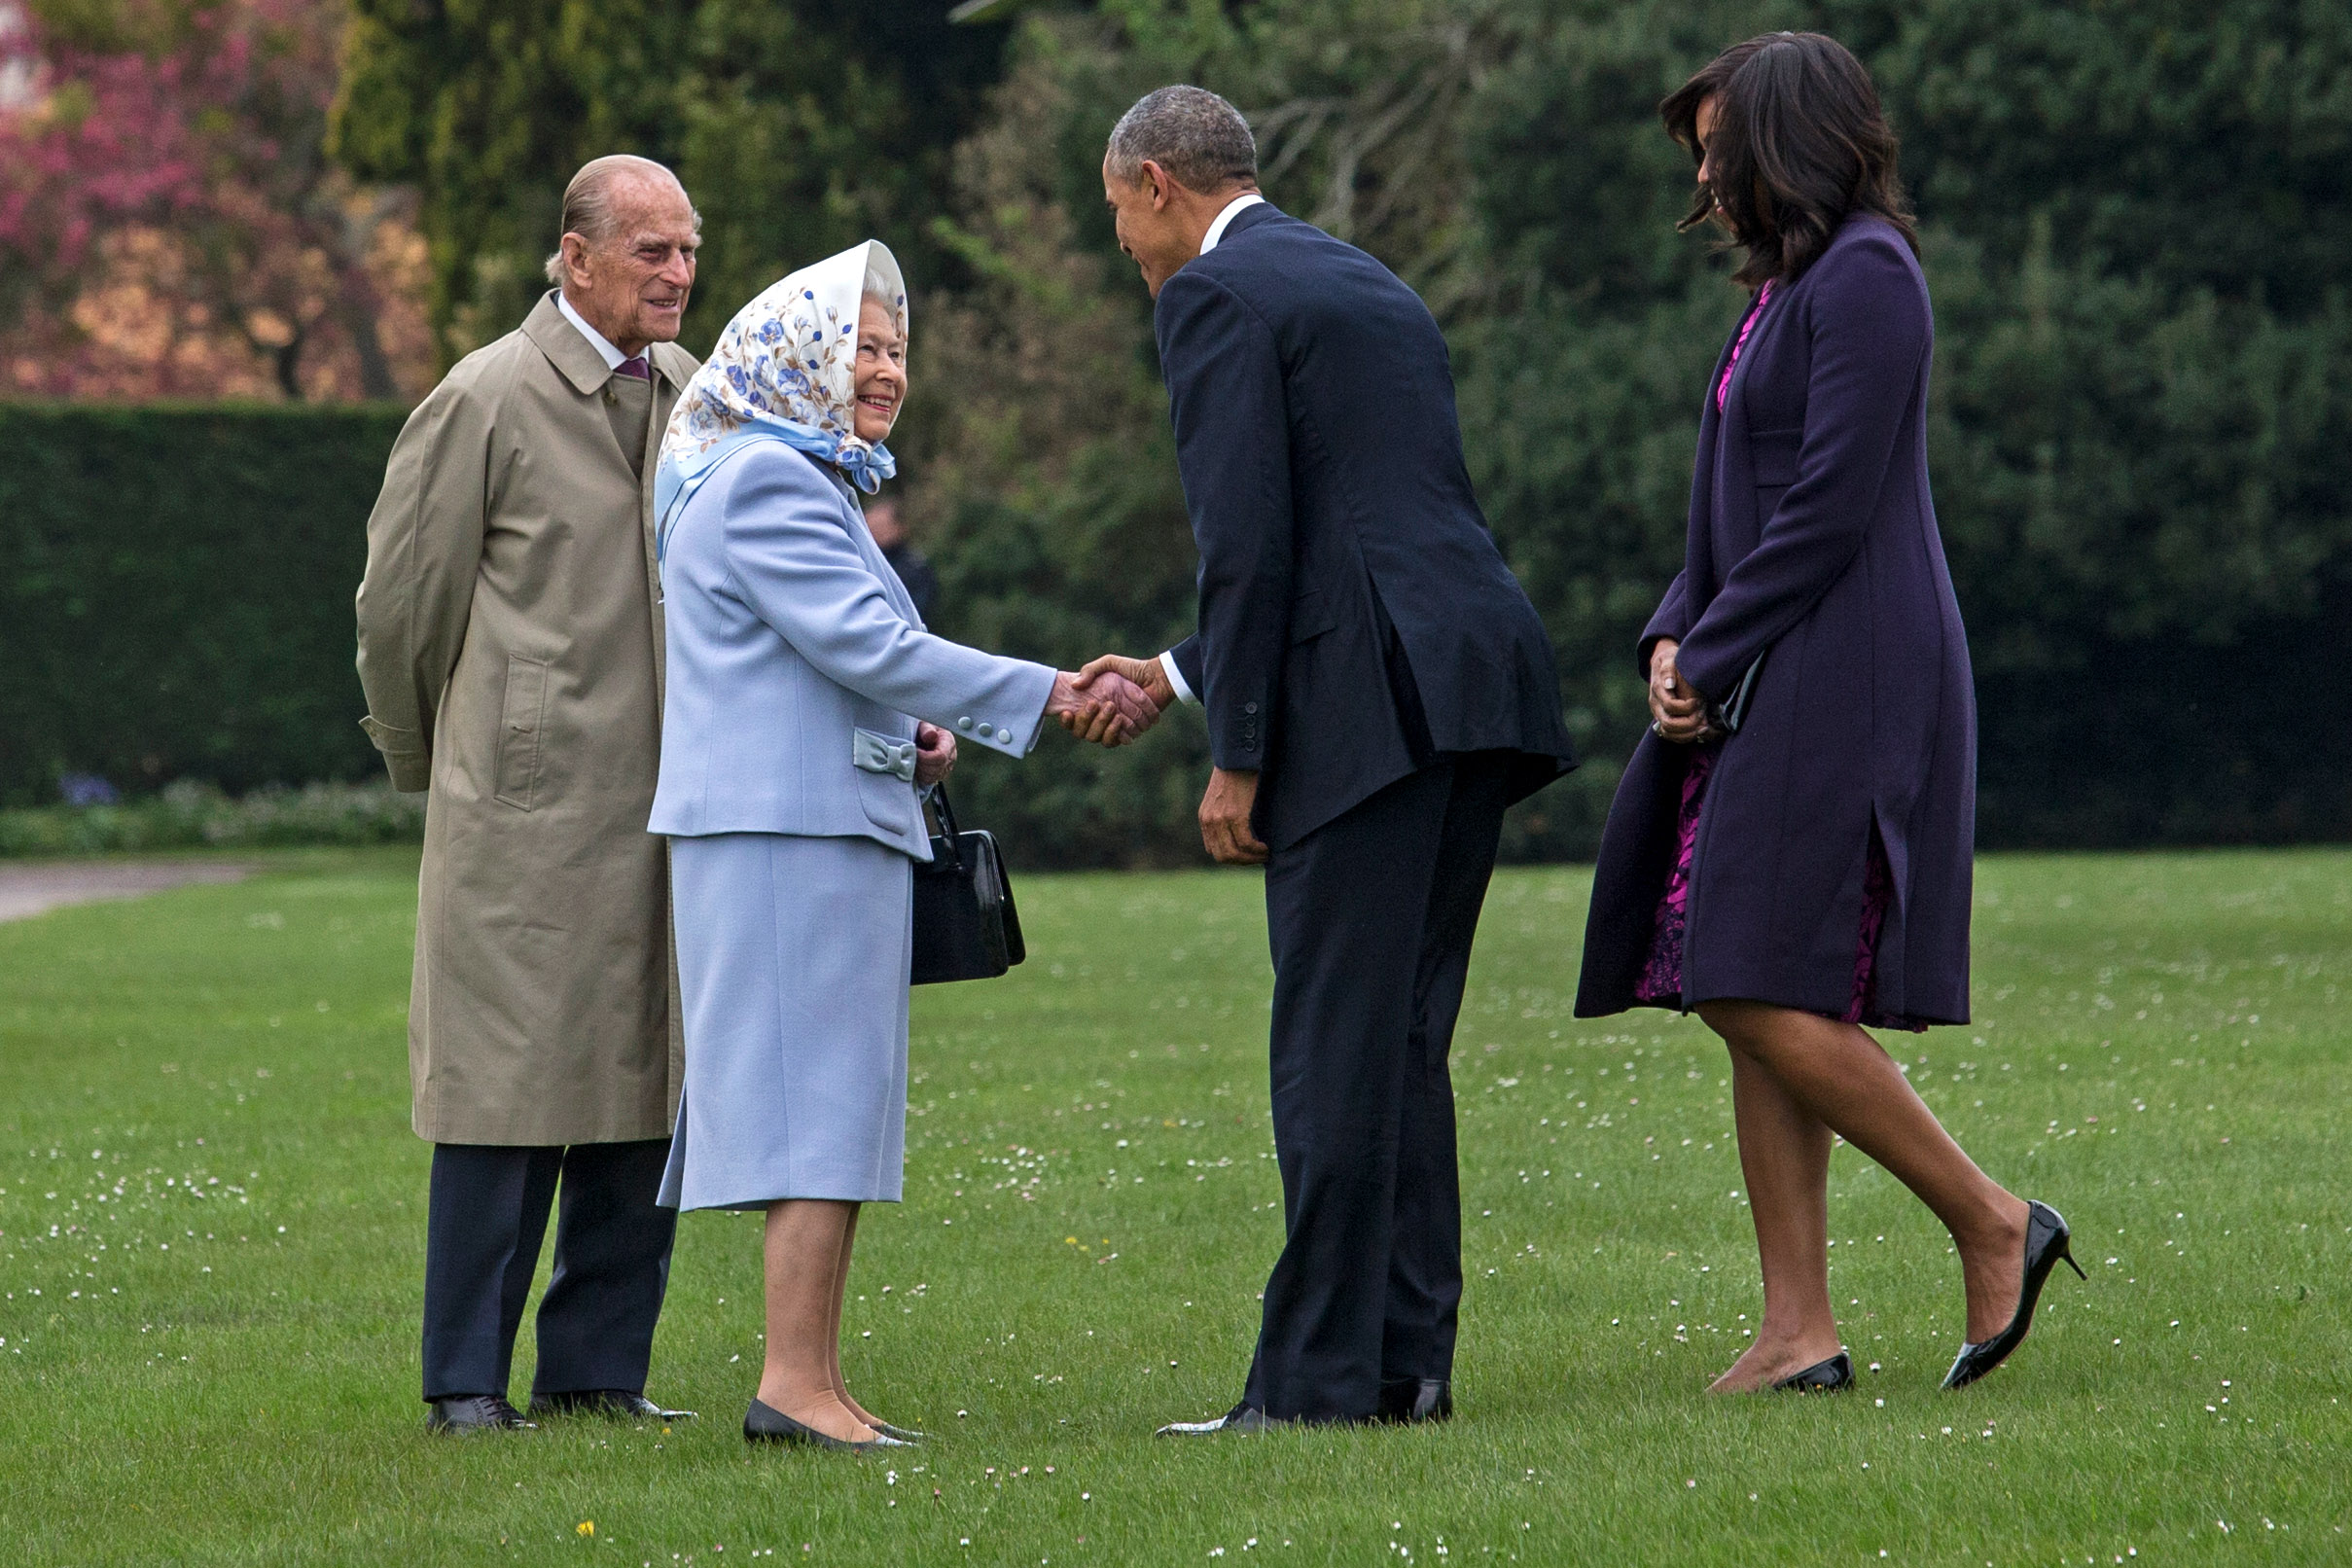 Queen Elizabeth, wearing a blue suit and headscarf, shakes hands with then-President Barack Obama as their spouses stand on the grass nearby.